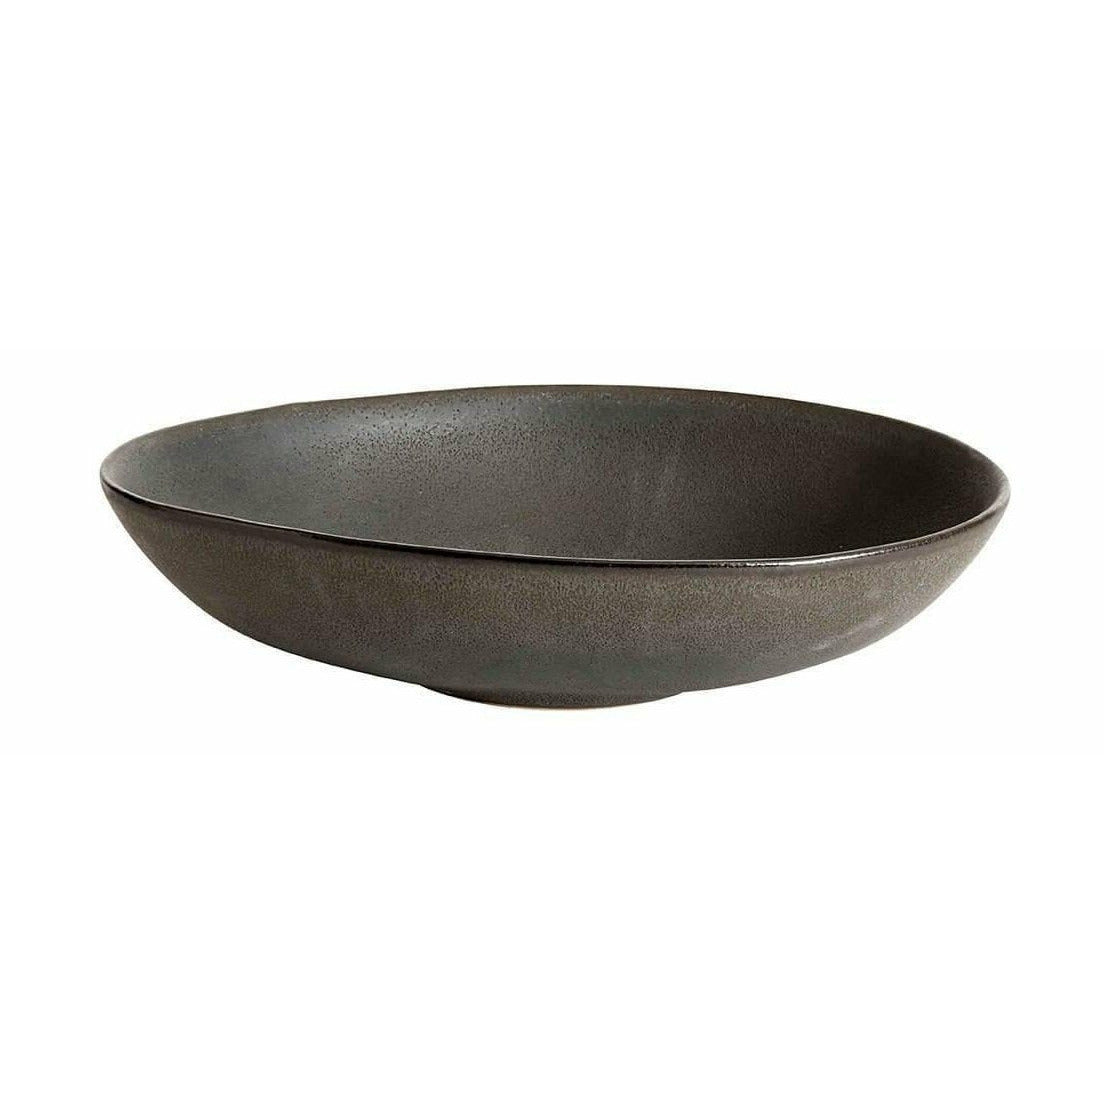 Muubs Mame Serving Bowl Coffee, 19cm